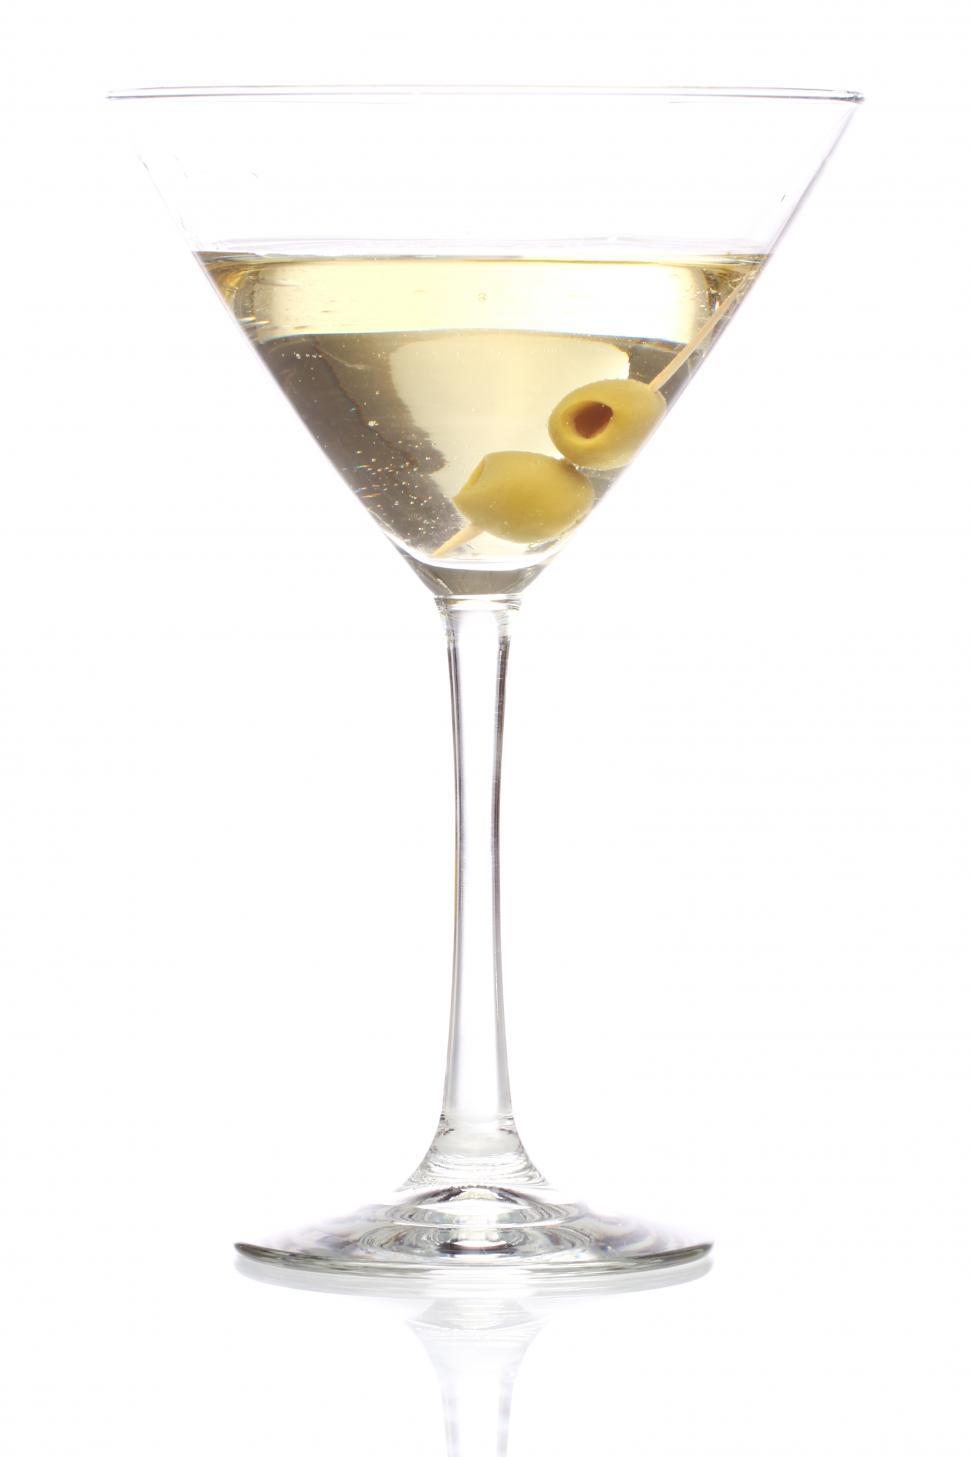 Free Image of Martini cocktail with two olives, up 